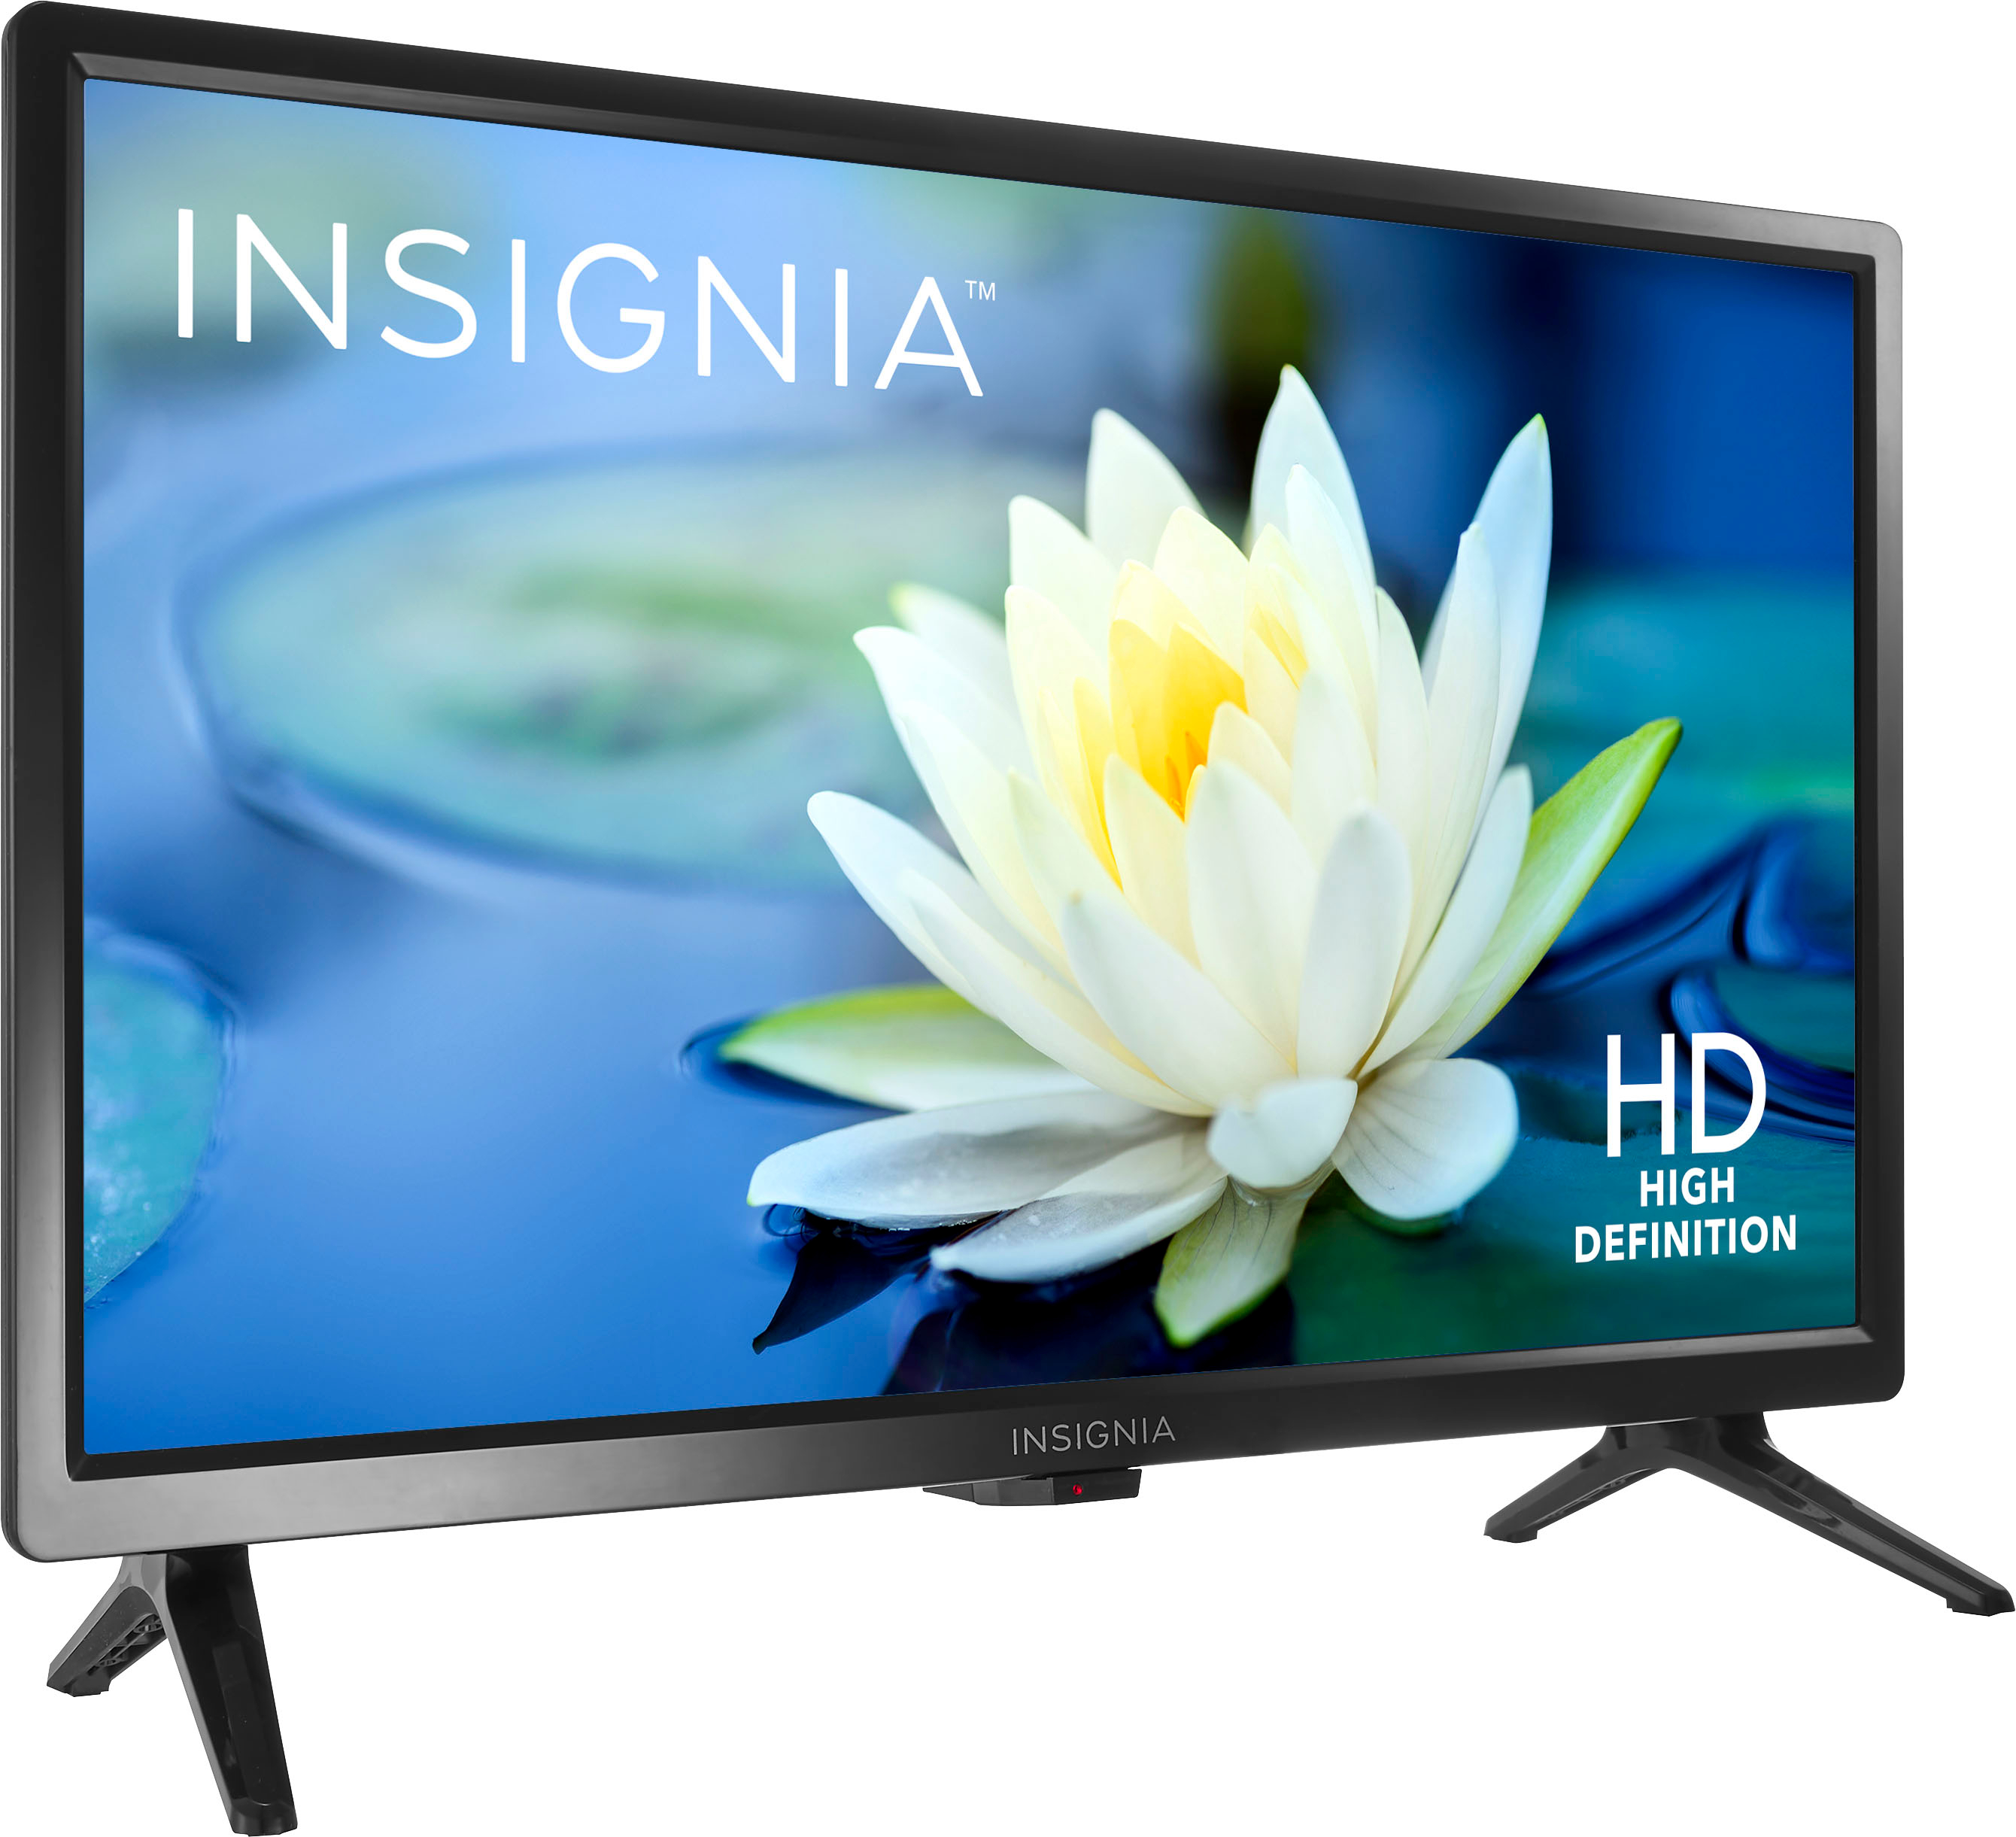 Angle View: Insignia™ - 19" Class N10 Series LED HD TV